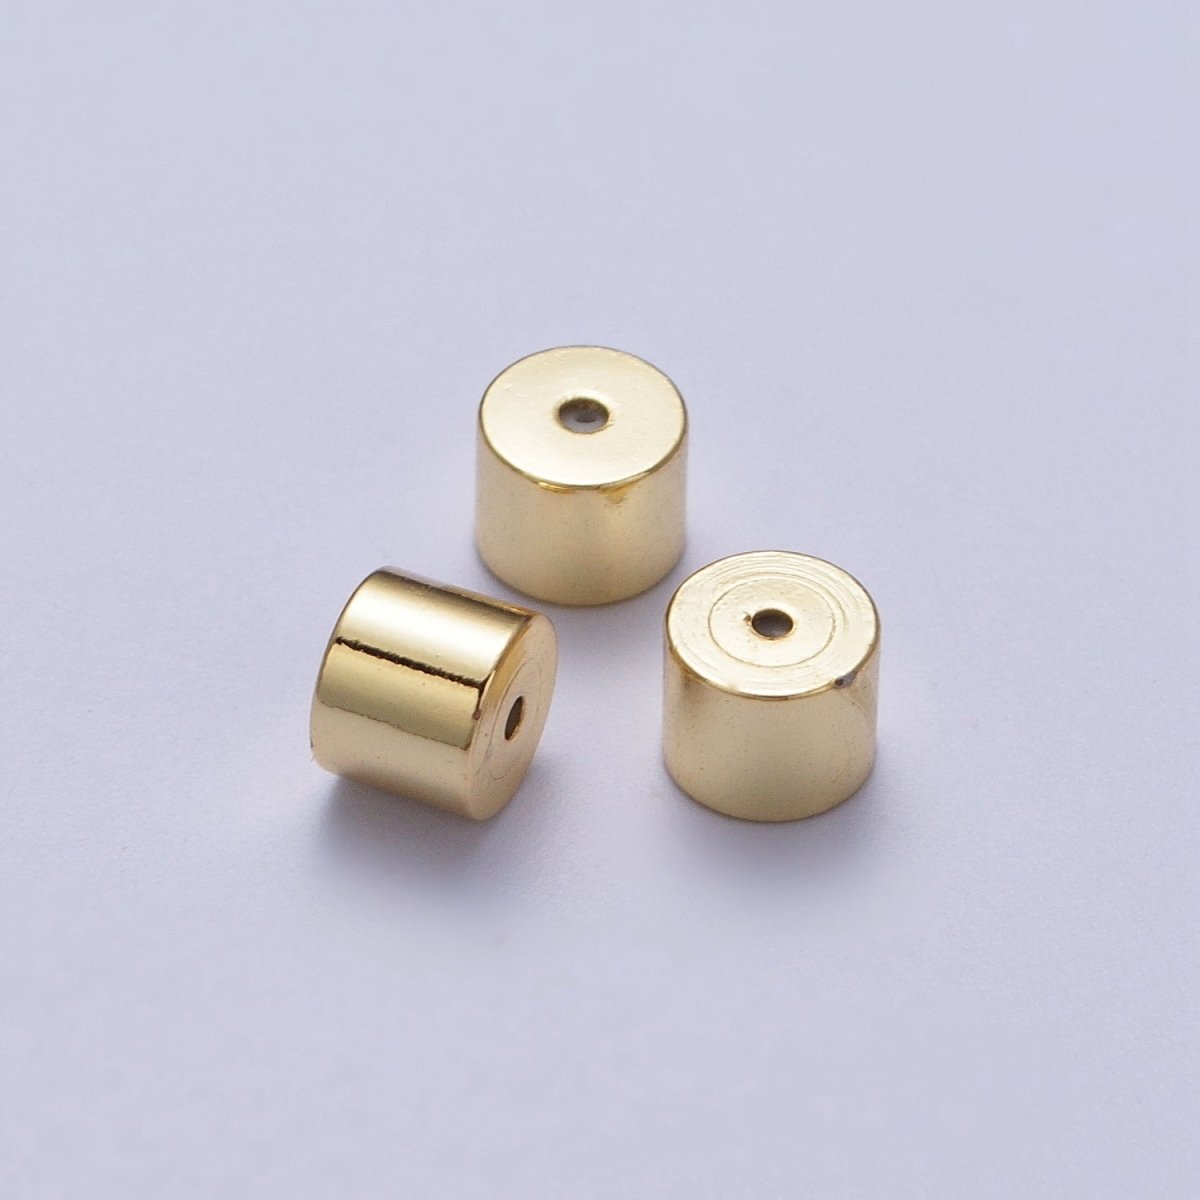 Minimalist Cylinder Earrings Backings Jewelry Supply (12 Pieces) Set in Gold & Silver | K-074 K-076 - DLUXCA